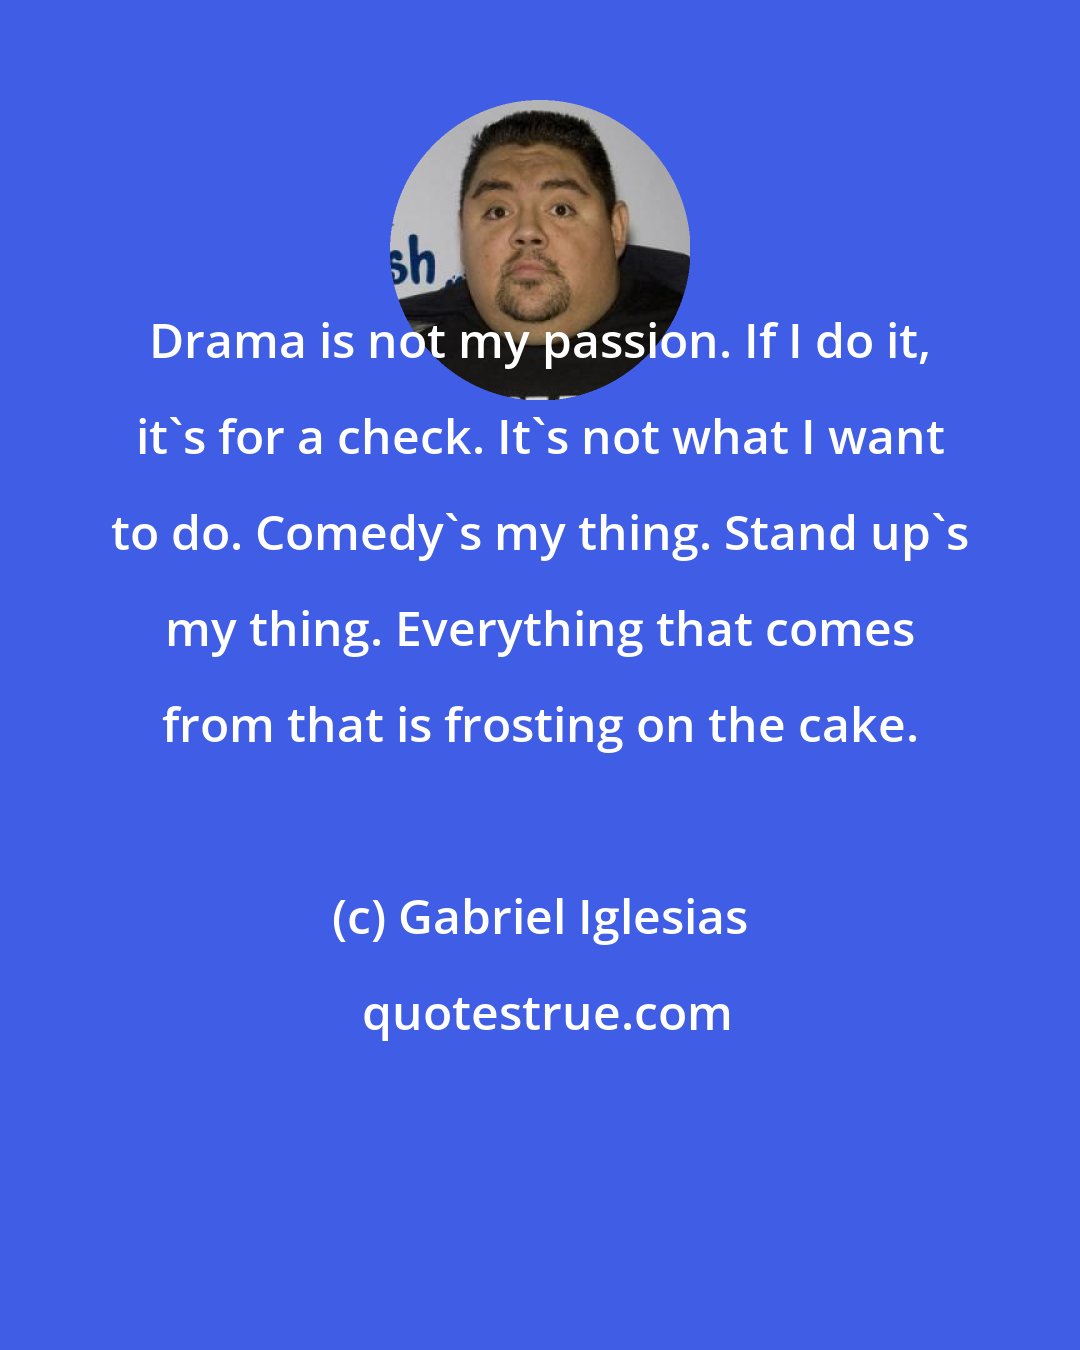 Gabriel Iglesias: Drama is not my passion. If I do it, it's for a check. It's not what I want to do. Comedy's my thing. Stand up's my thing. Everything that comes from that is frosting on the cake.